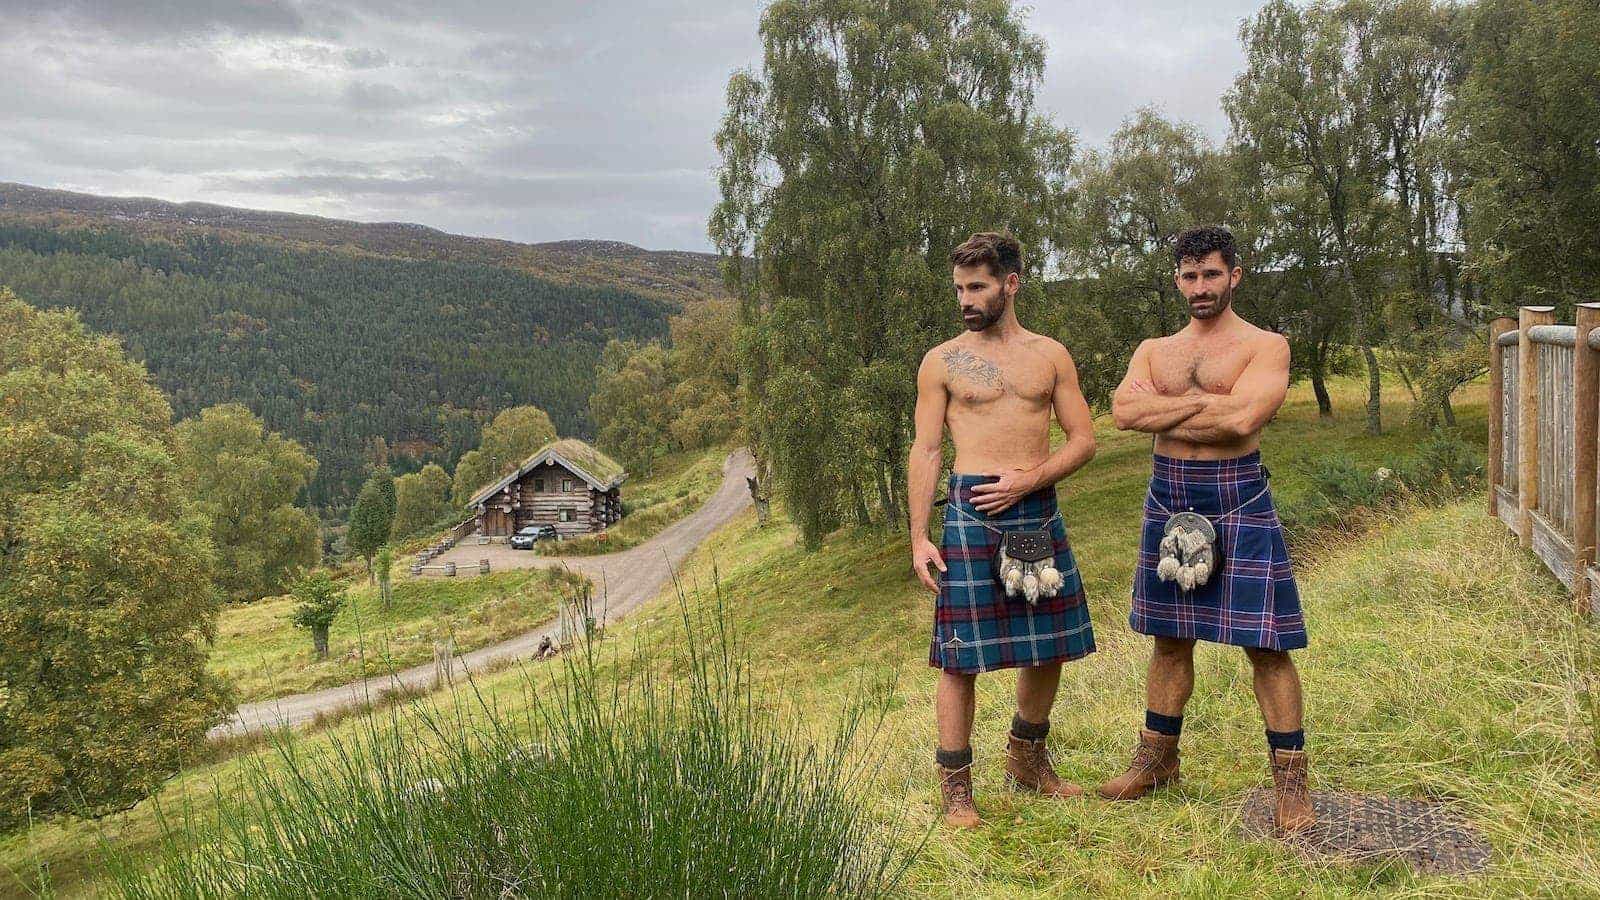 Gay couple in kilts topless at Eagle Brae in the Highlands, Scotland.